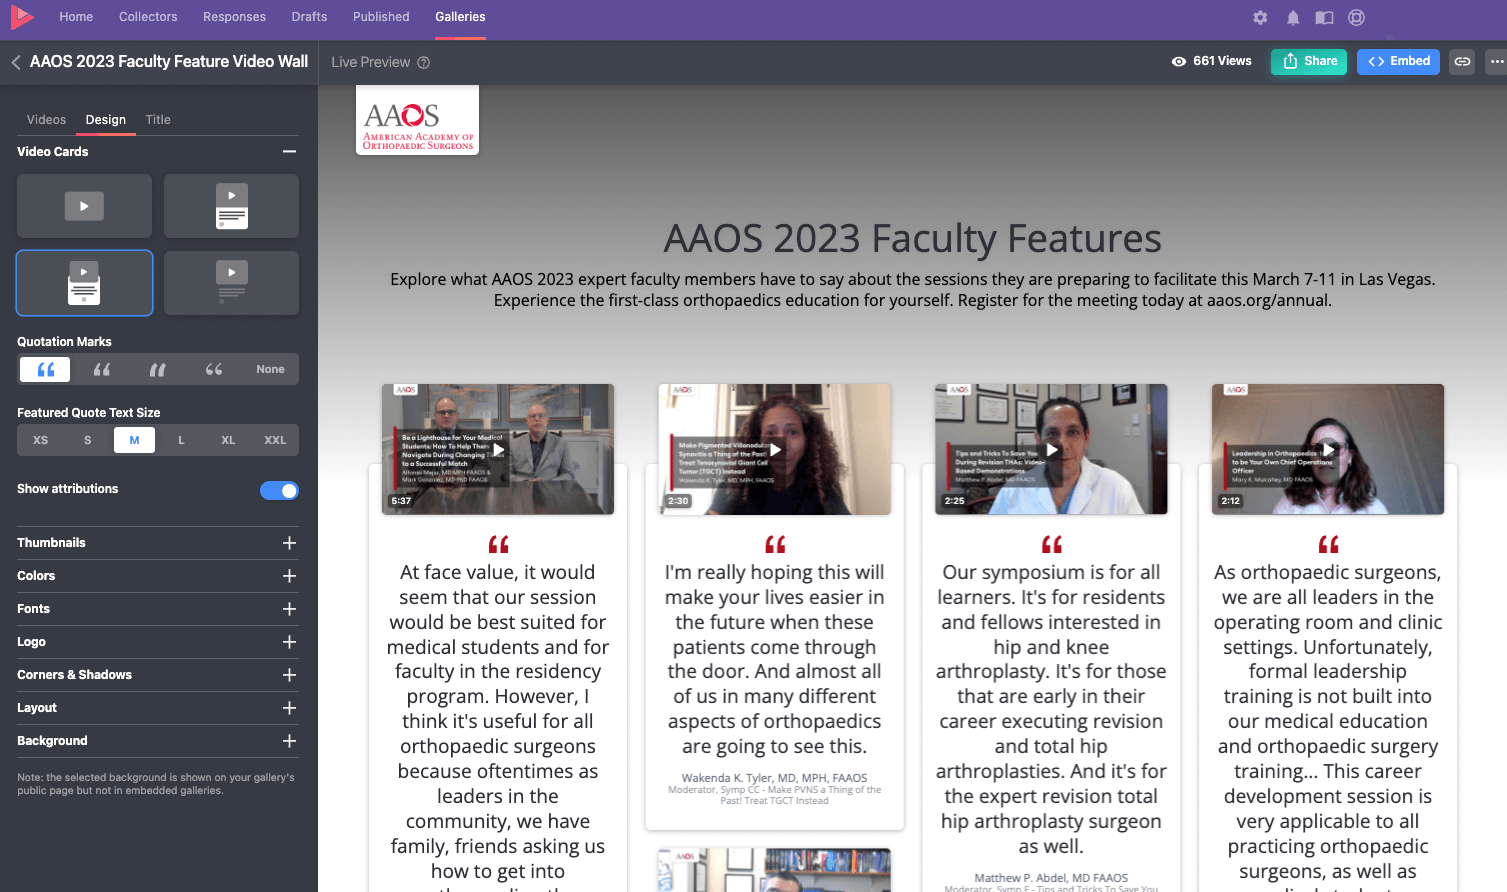 AAOS 2023 Faculty Feature Video Wall: Design Options